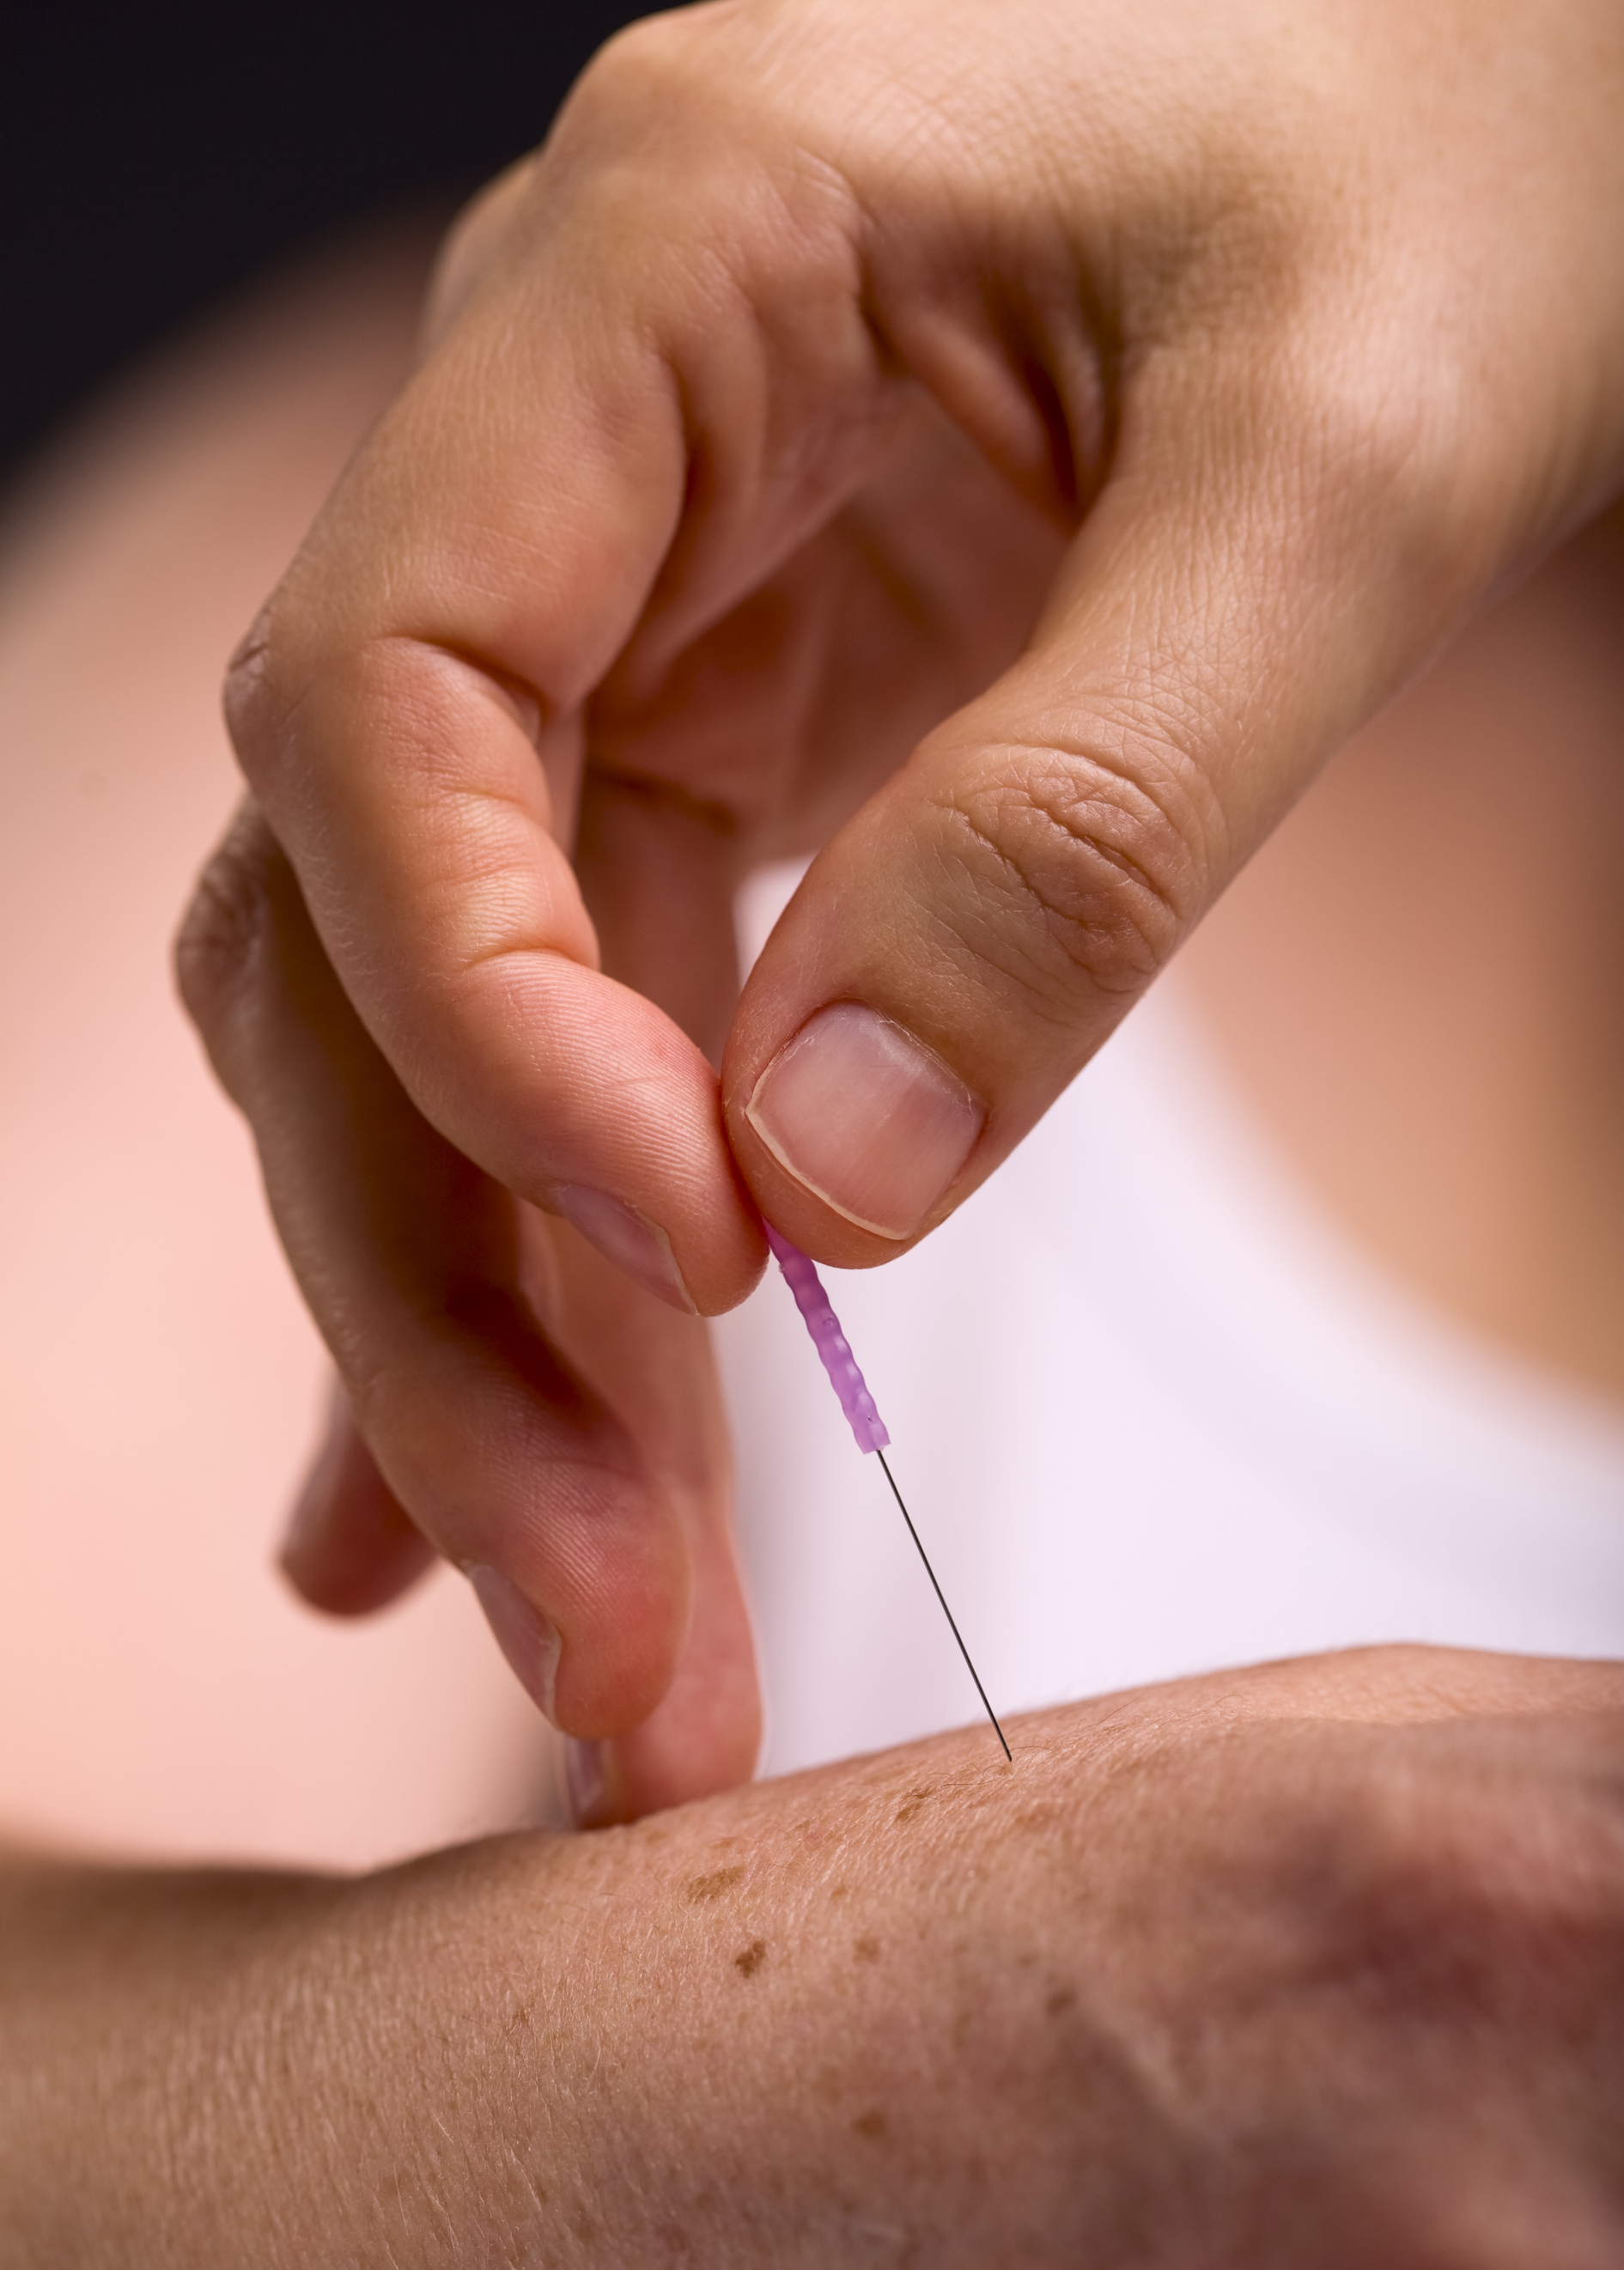 An acupuncturist carefully inserts a tiny needle.